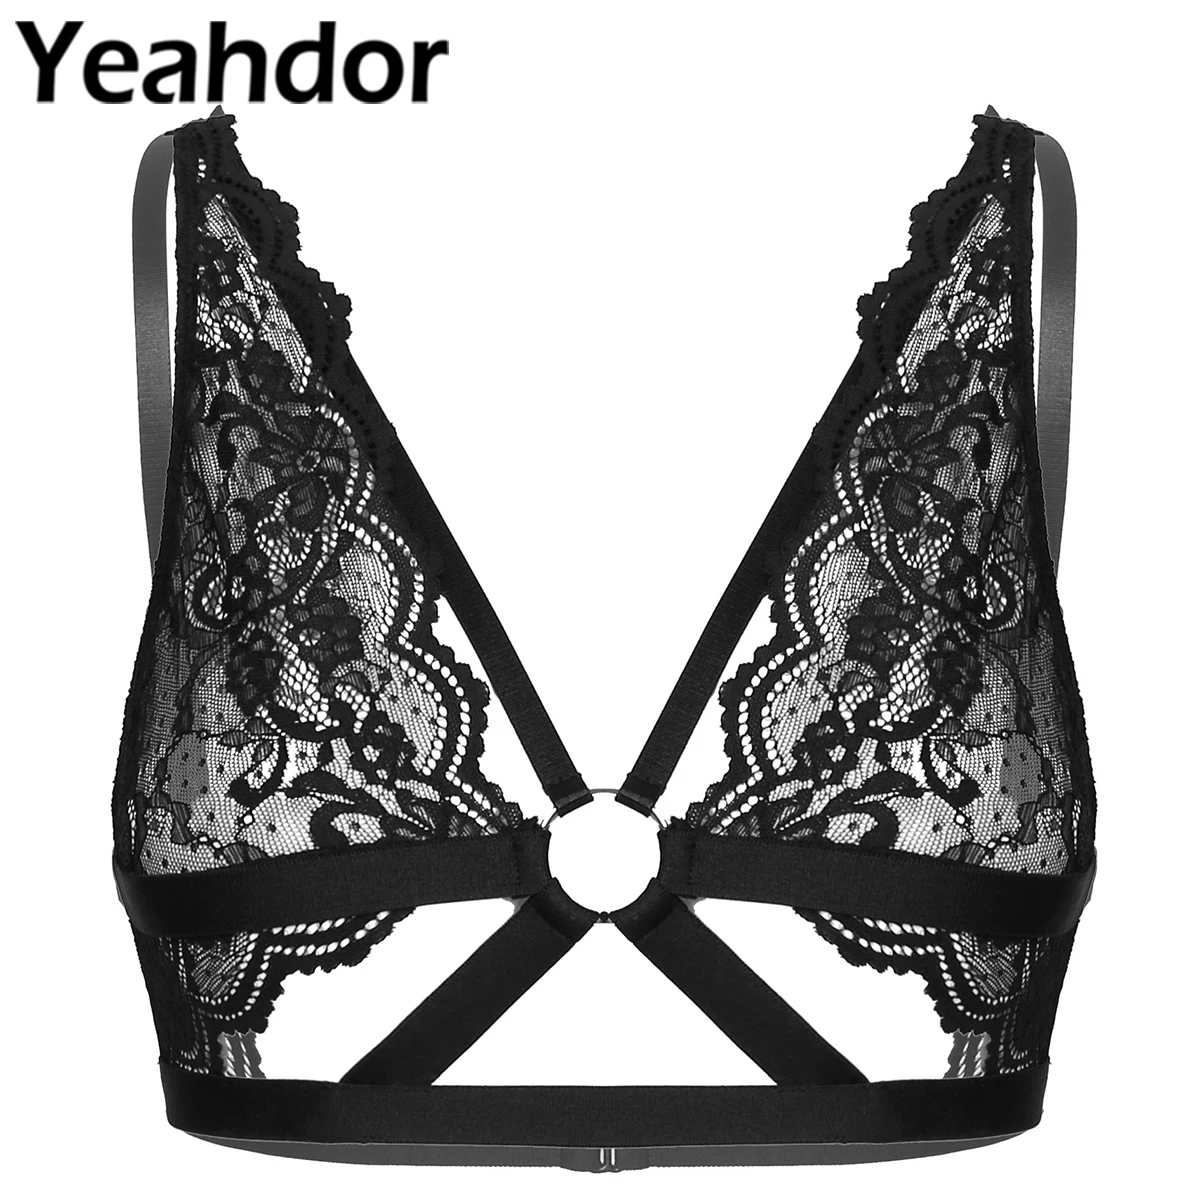 

Women Sexy Lingerie Bras Top See-through Floral Lace Strappy Bra Tops Hollow Out O-ring Bralette Brassiere Exotic Underwear